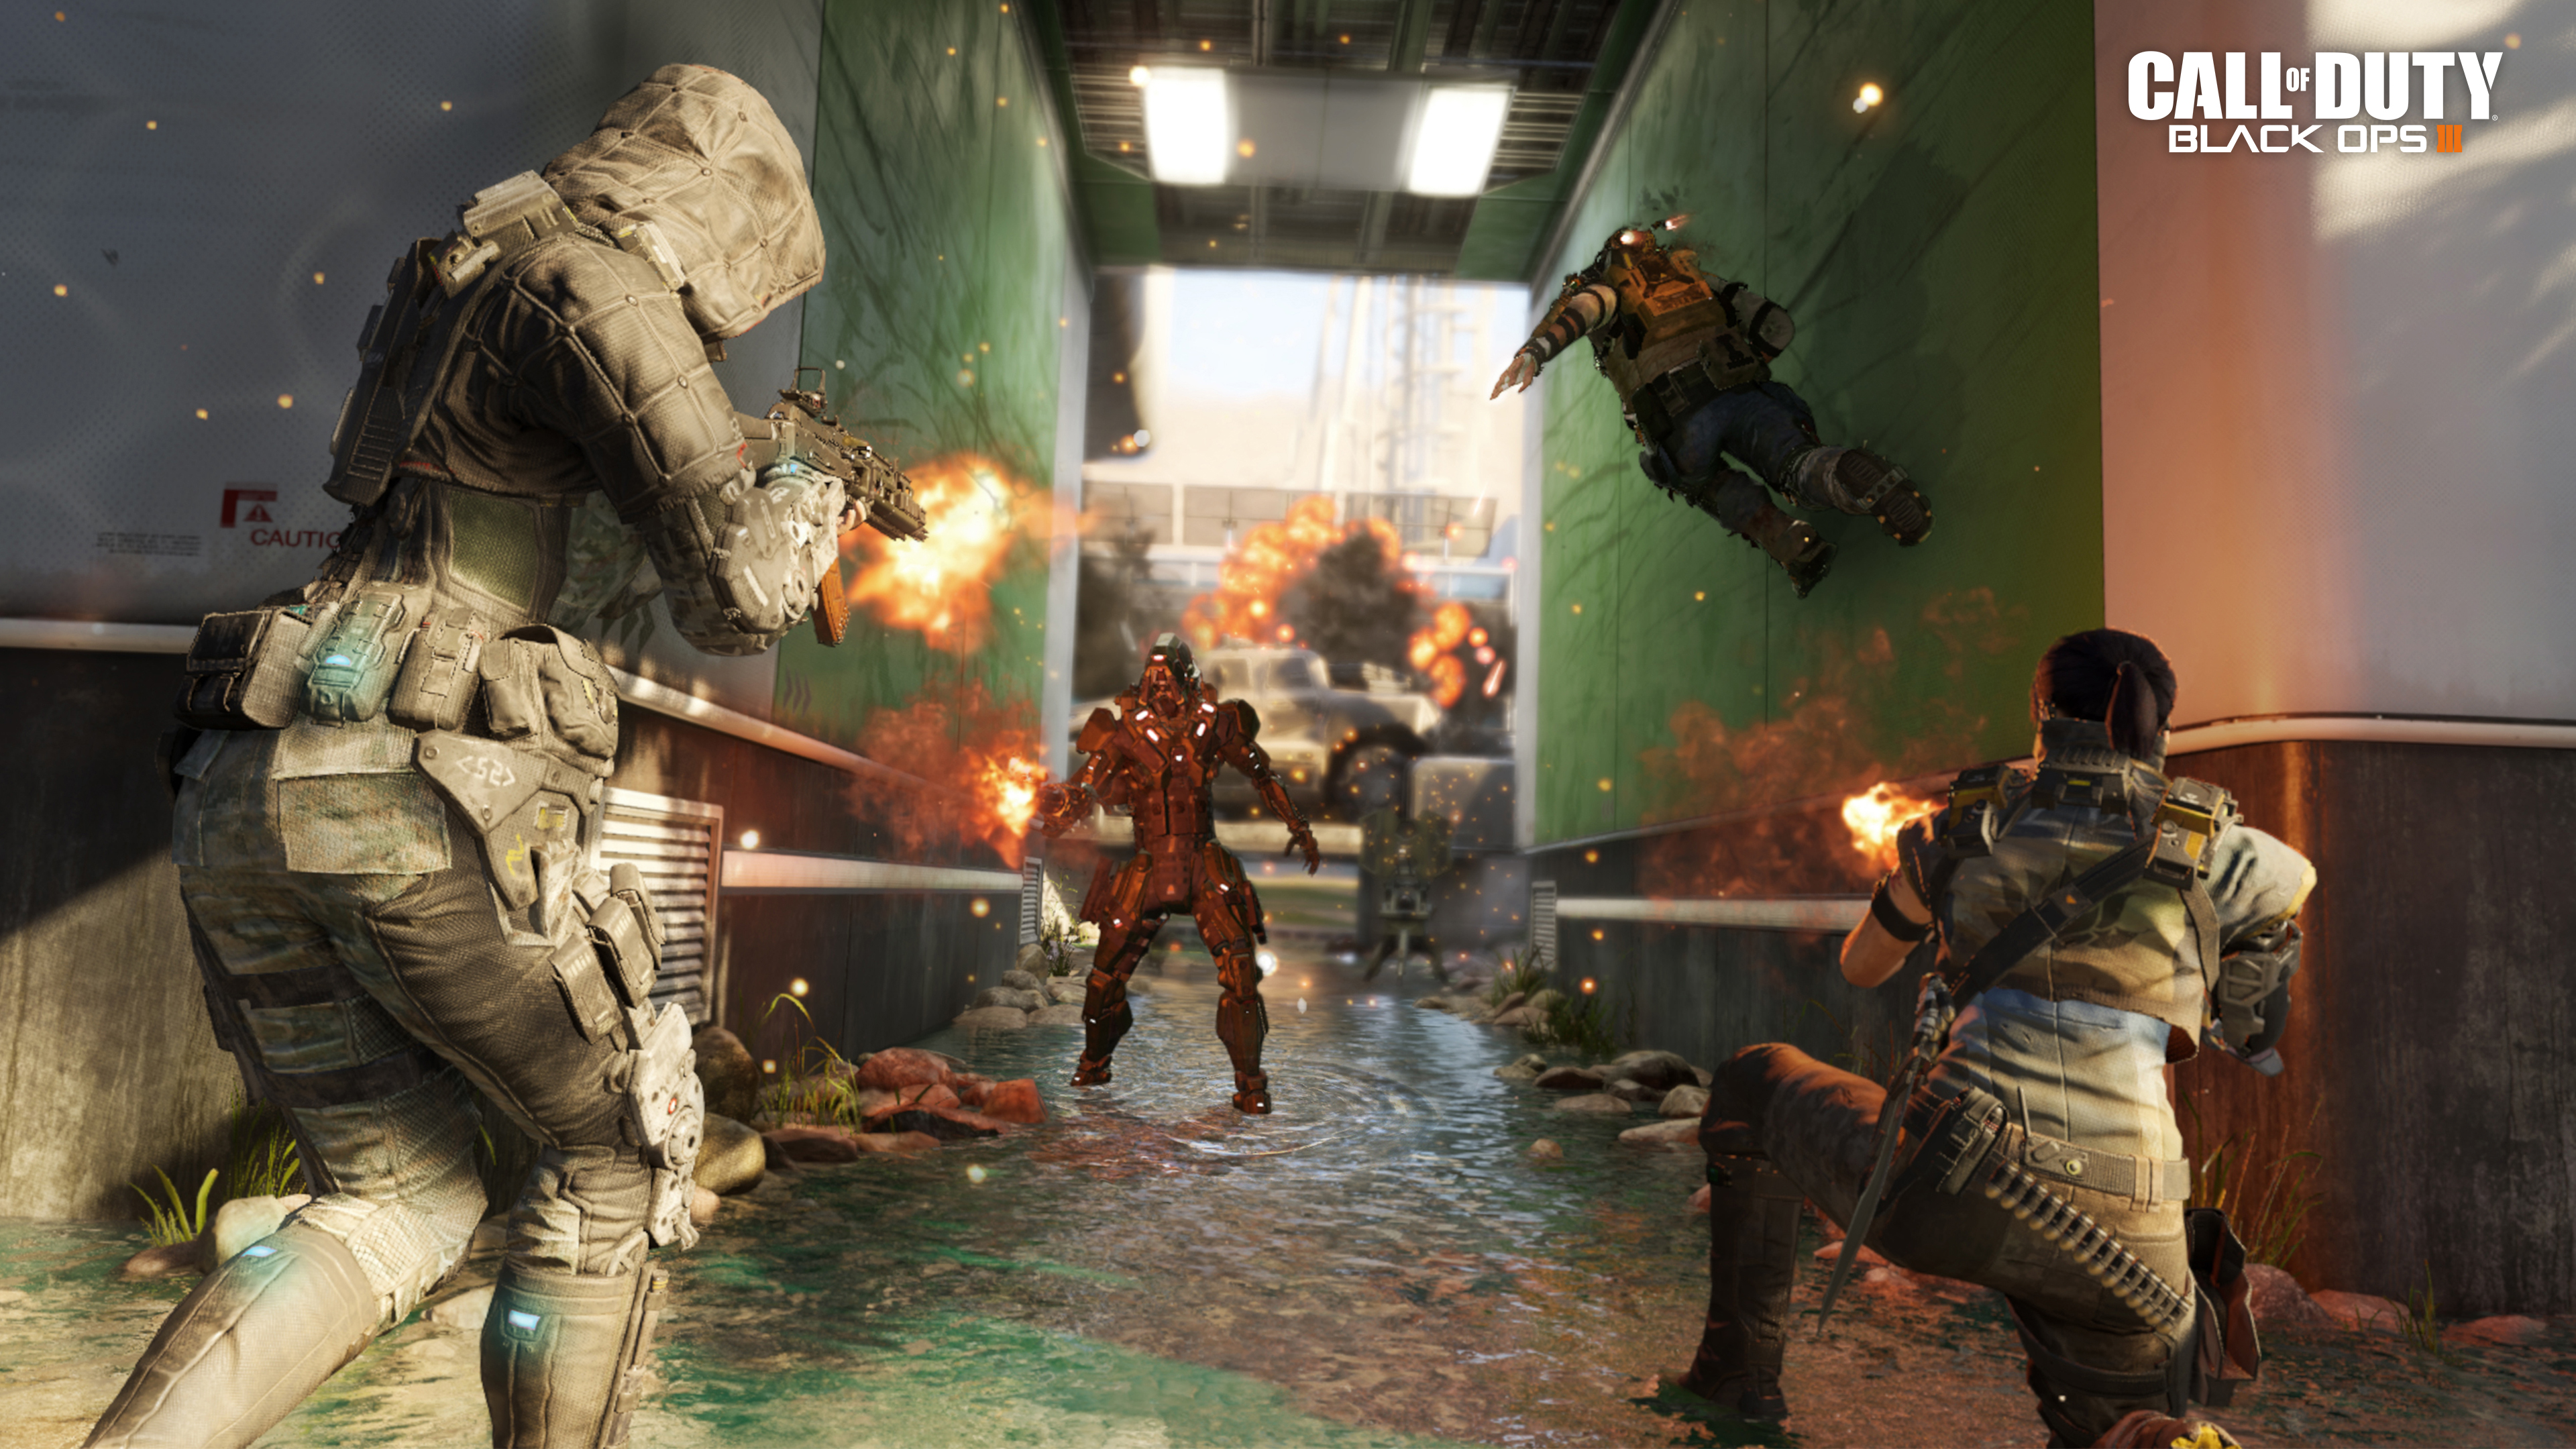 Black Ops 3 review assets #4